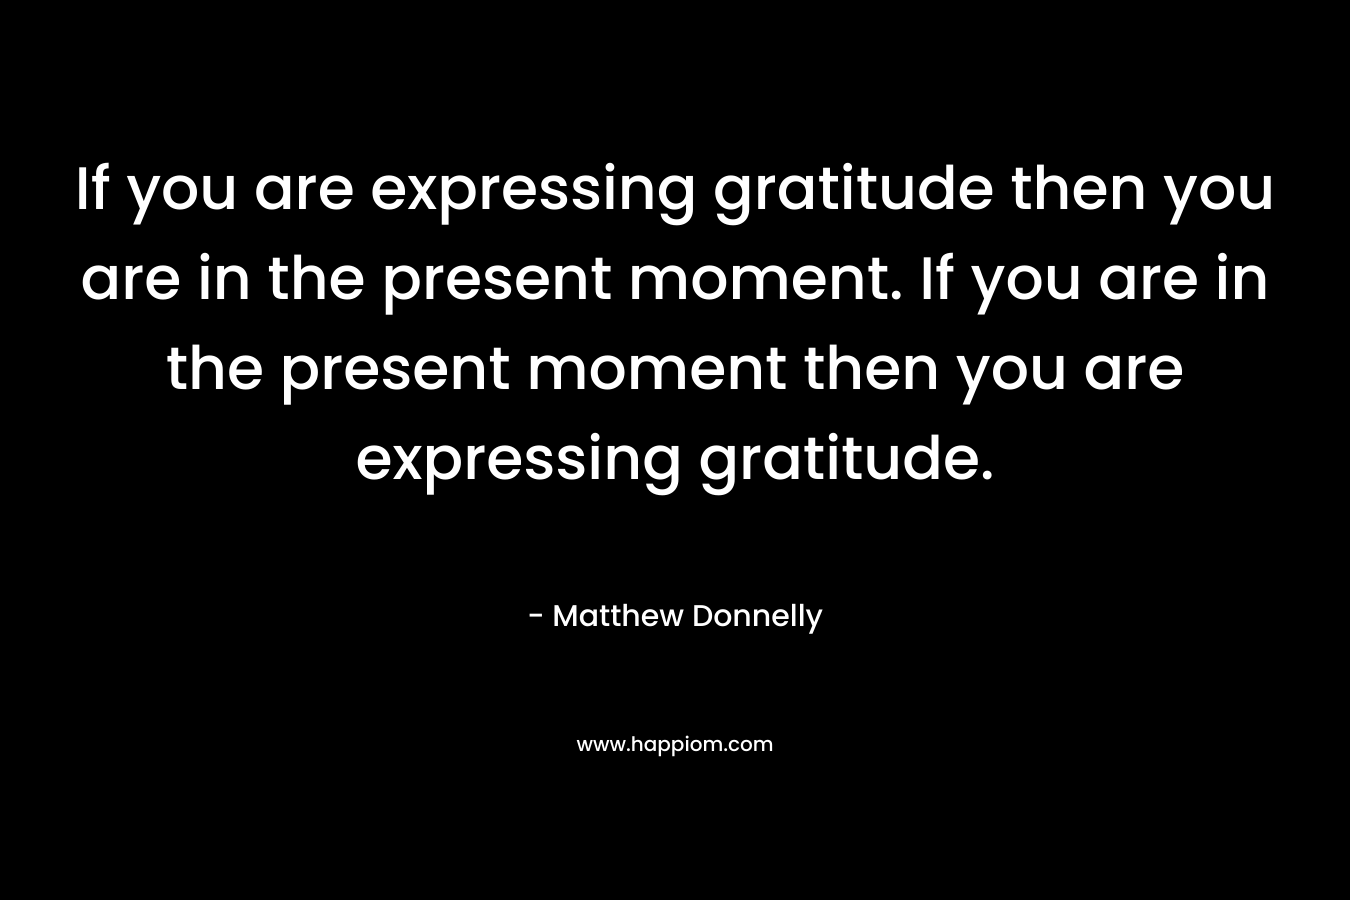 If you are expressing gratitude then you are in the present moment. If you are in the present moment then you are expressing gratitude.